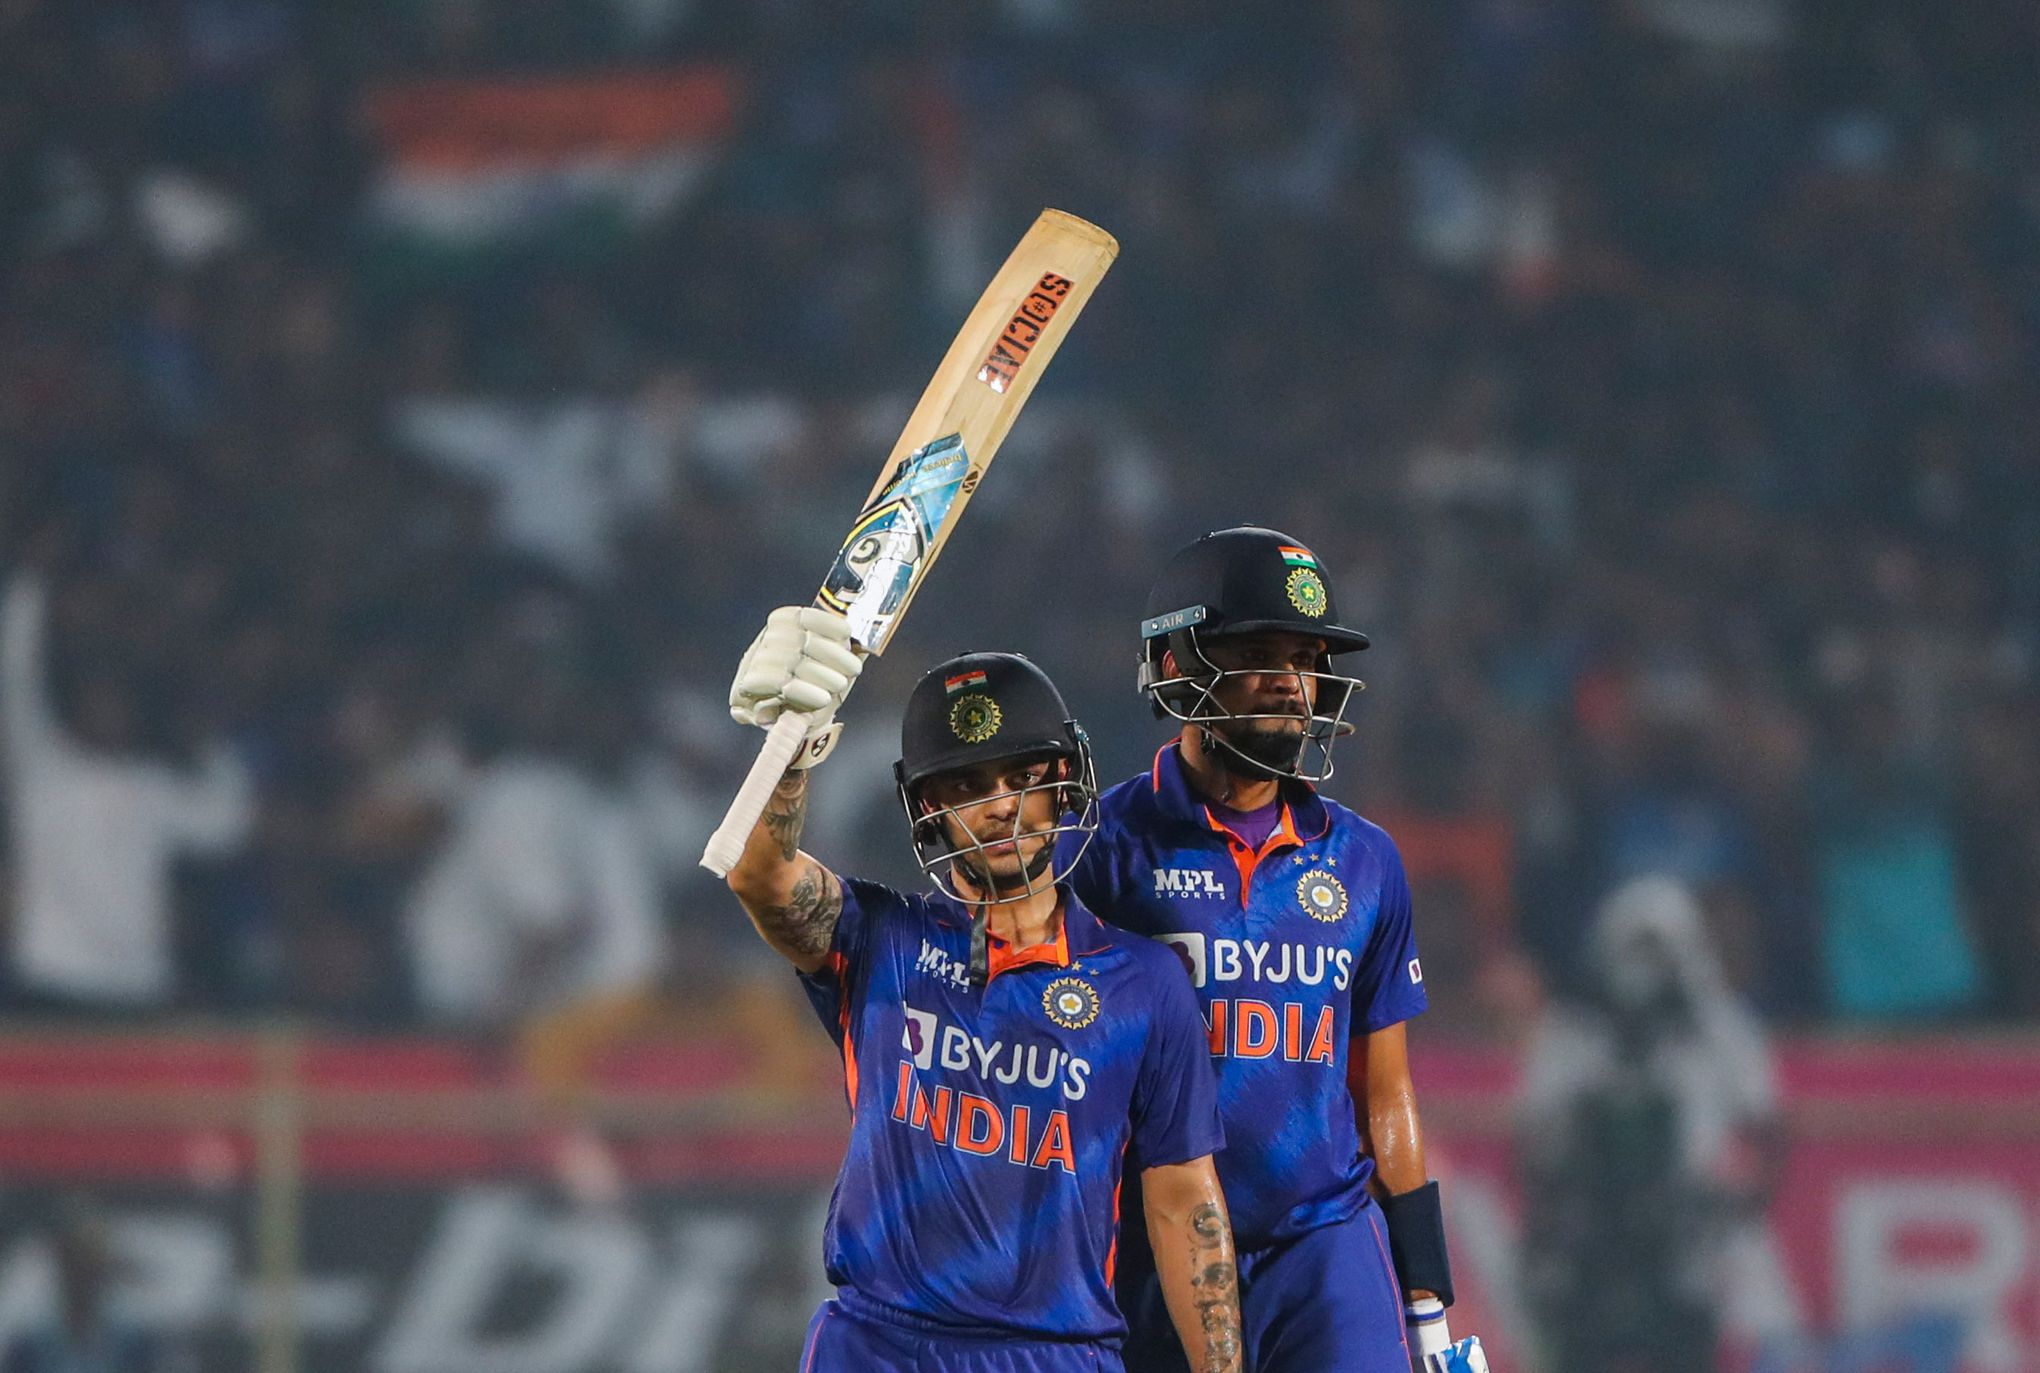 Viacom18 Wins Rights to India's Home Cricket Matches